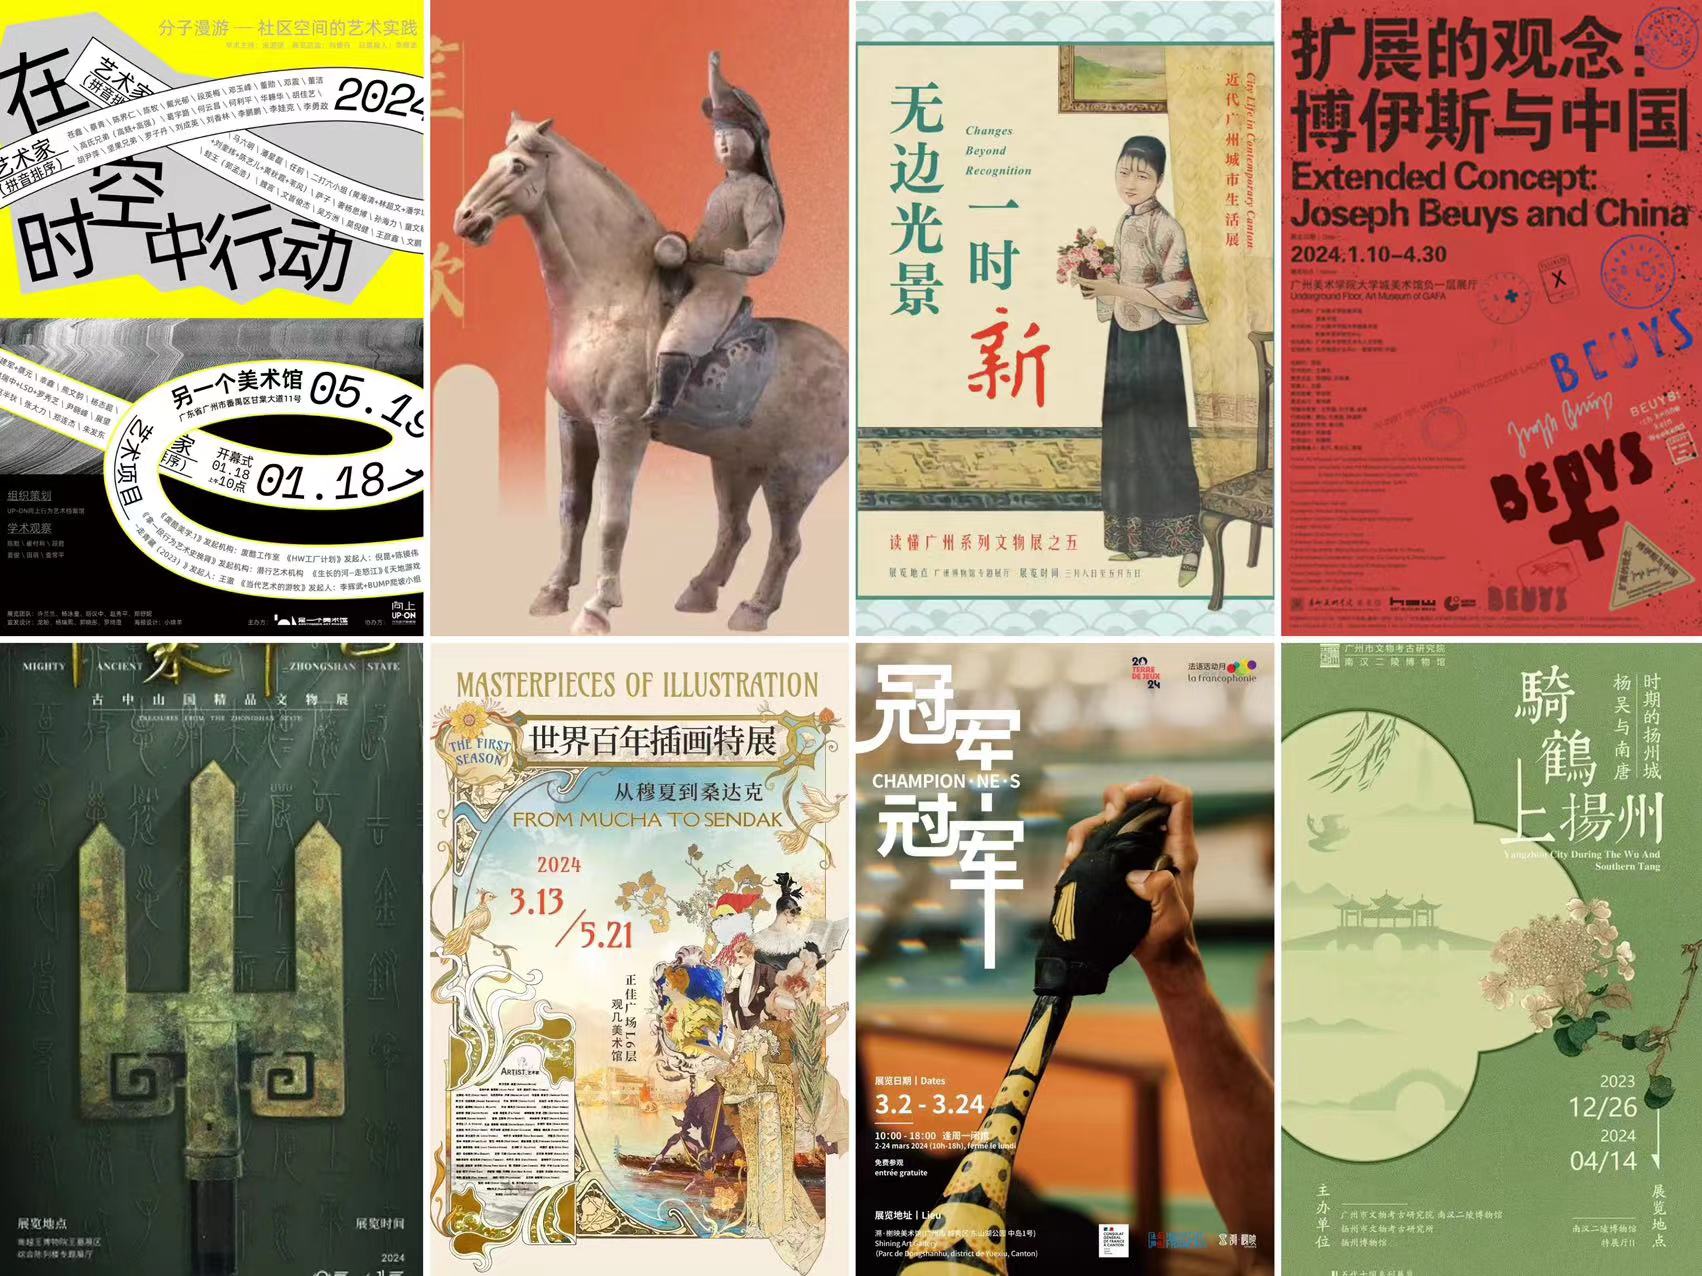 28 Amazing Art Shows This March in Guangzhou